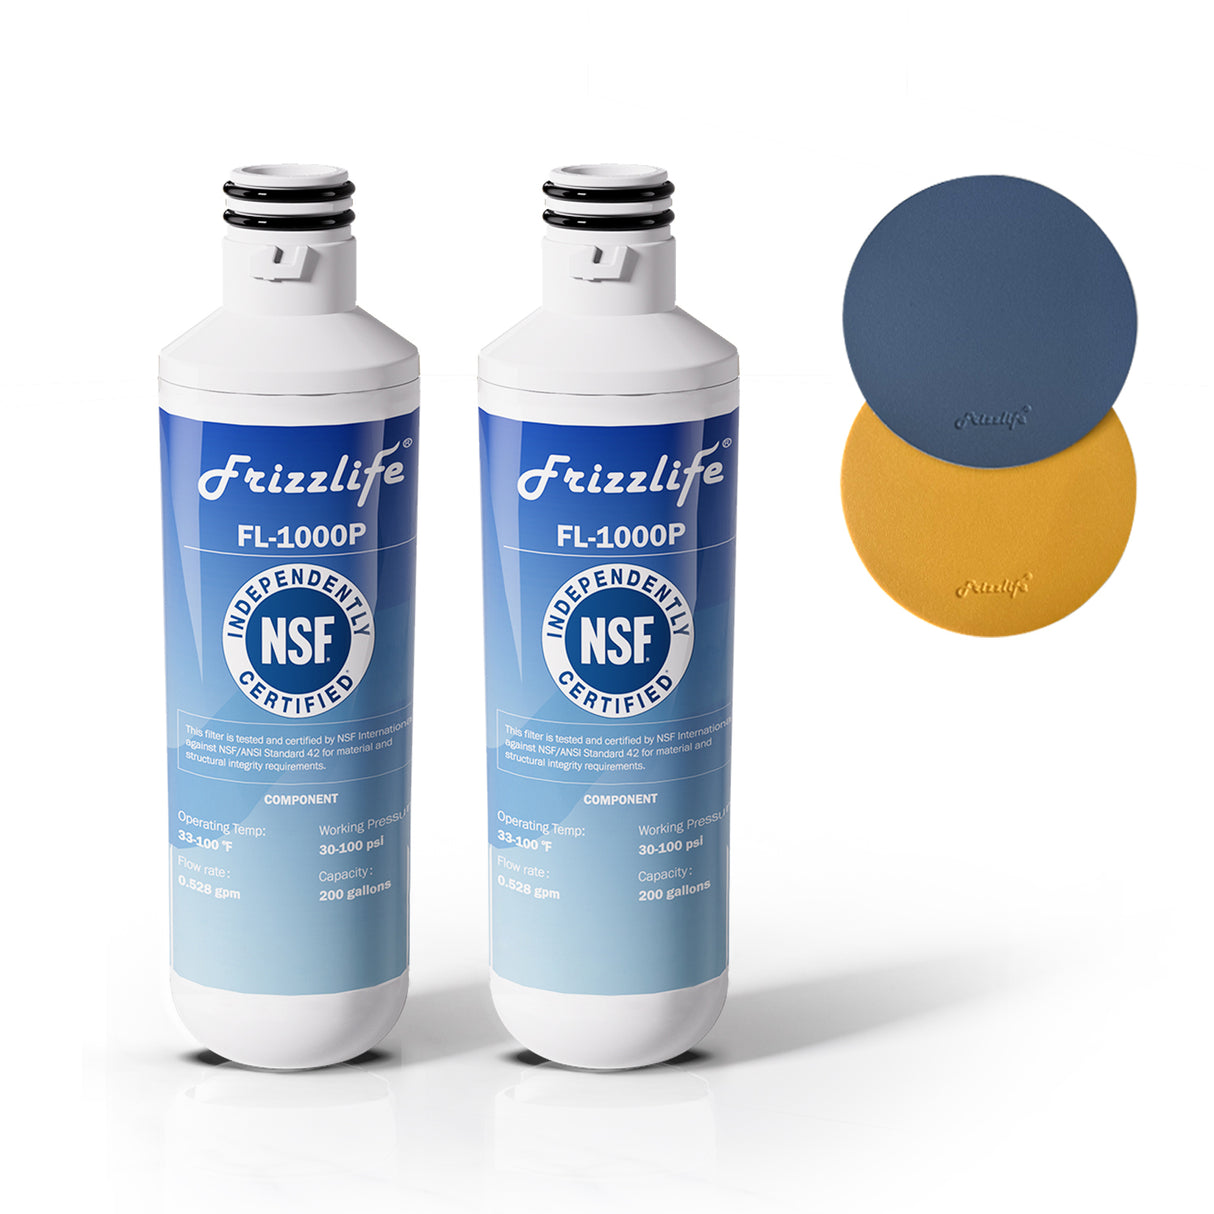 Frizzlife LT1000P Refrigerator Water Filter Replacement for LG LT1000P/PC/PCS, ADQ74793501, ADQ75795105, AGF80300704, NSF Certified Fit the Original Brand, Leak-proof Design